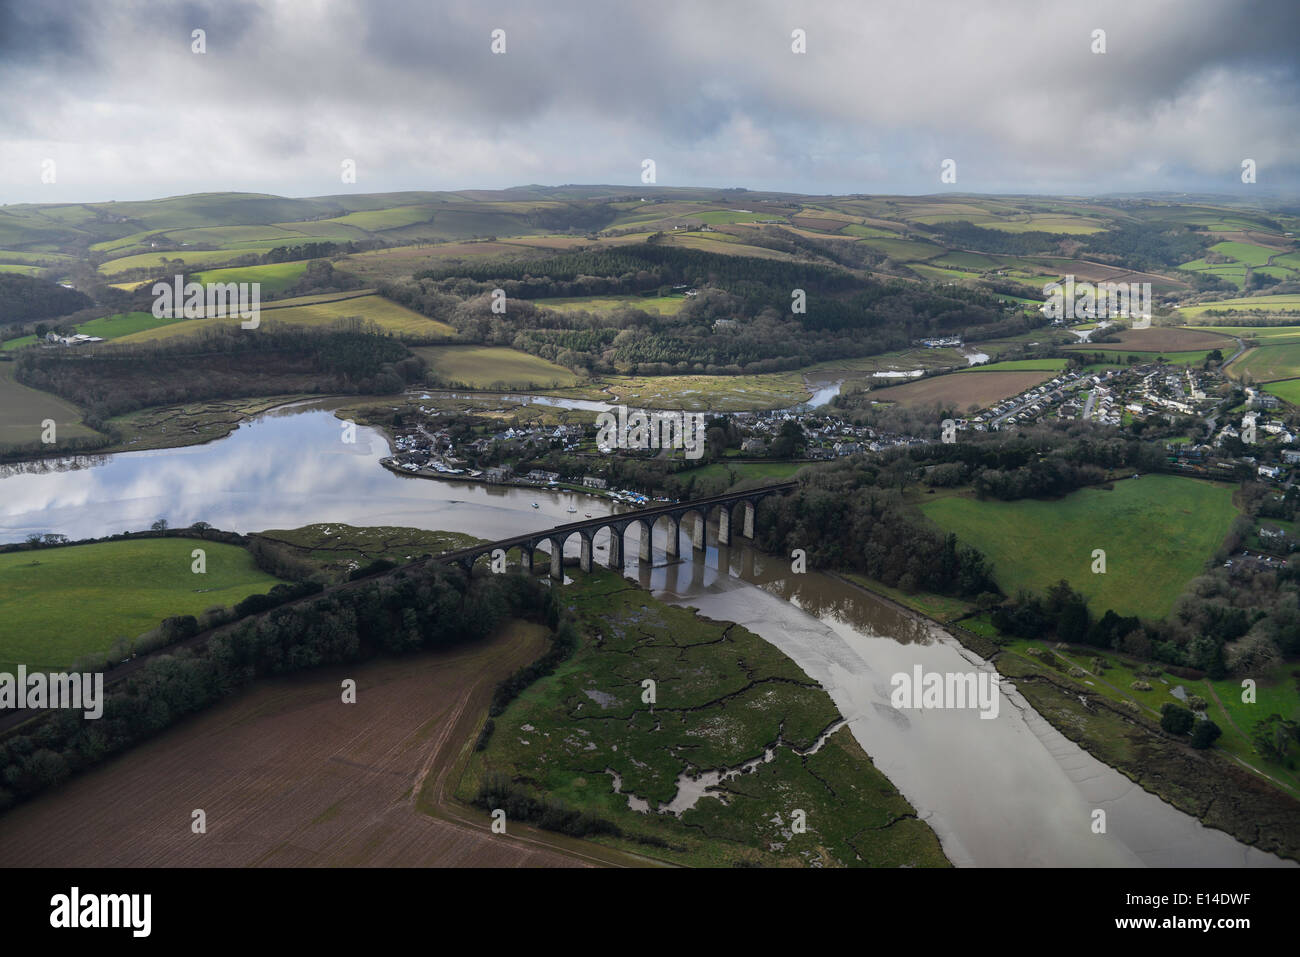 An aerial view of St Germans in Cornwall showing the viaduct over the River Lynher Stock Photo